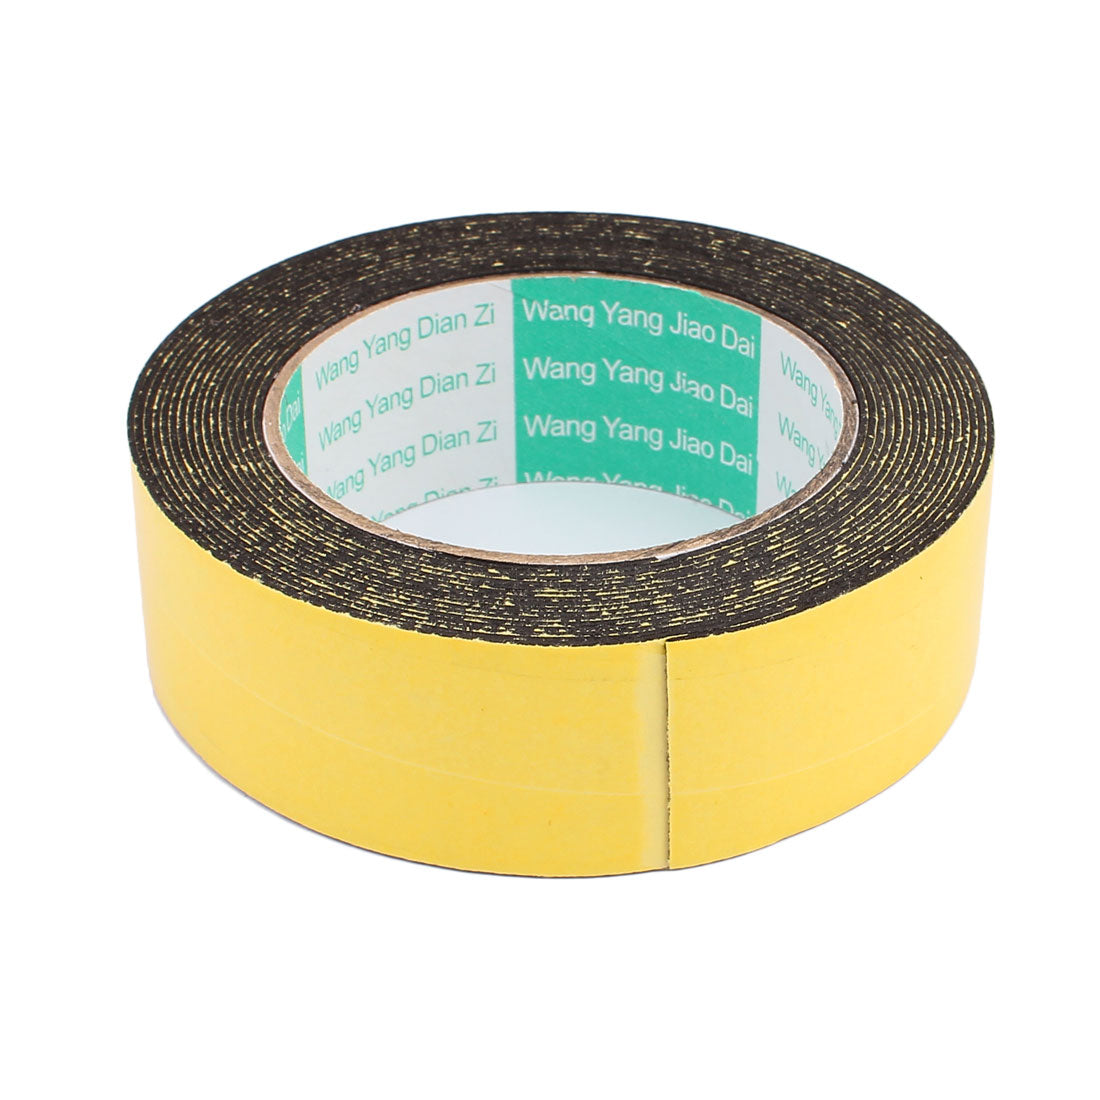 uxcell Uxcell 35mm x 1mm Single Side Self Adhesive Shockproof Sponge Foam Tape 5 Meters Length